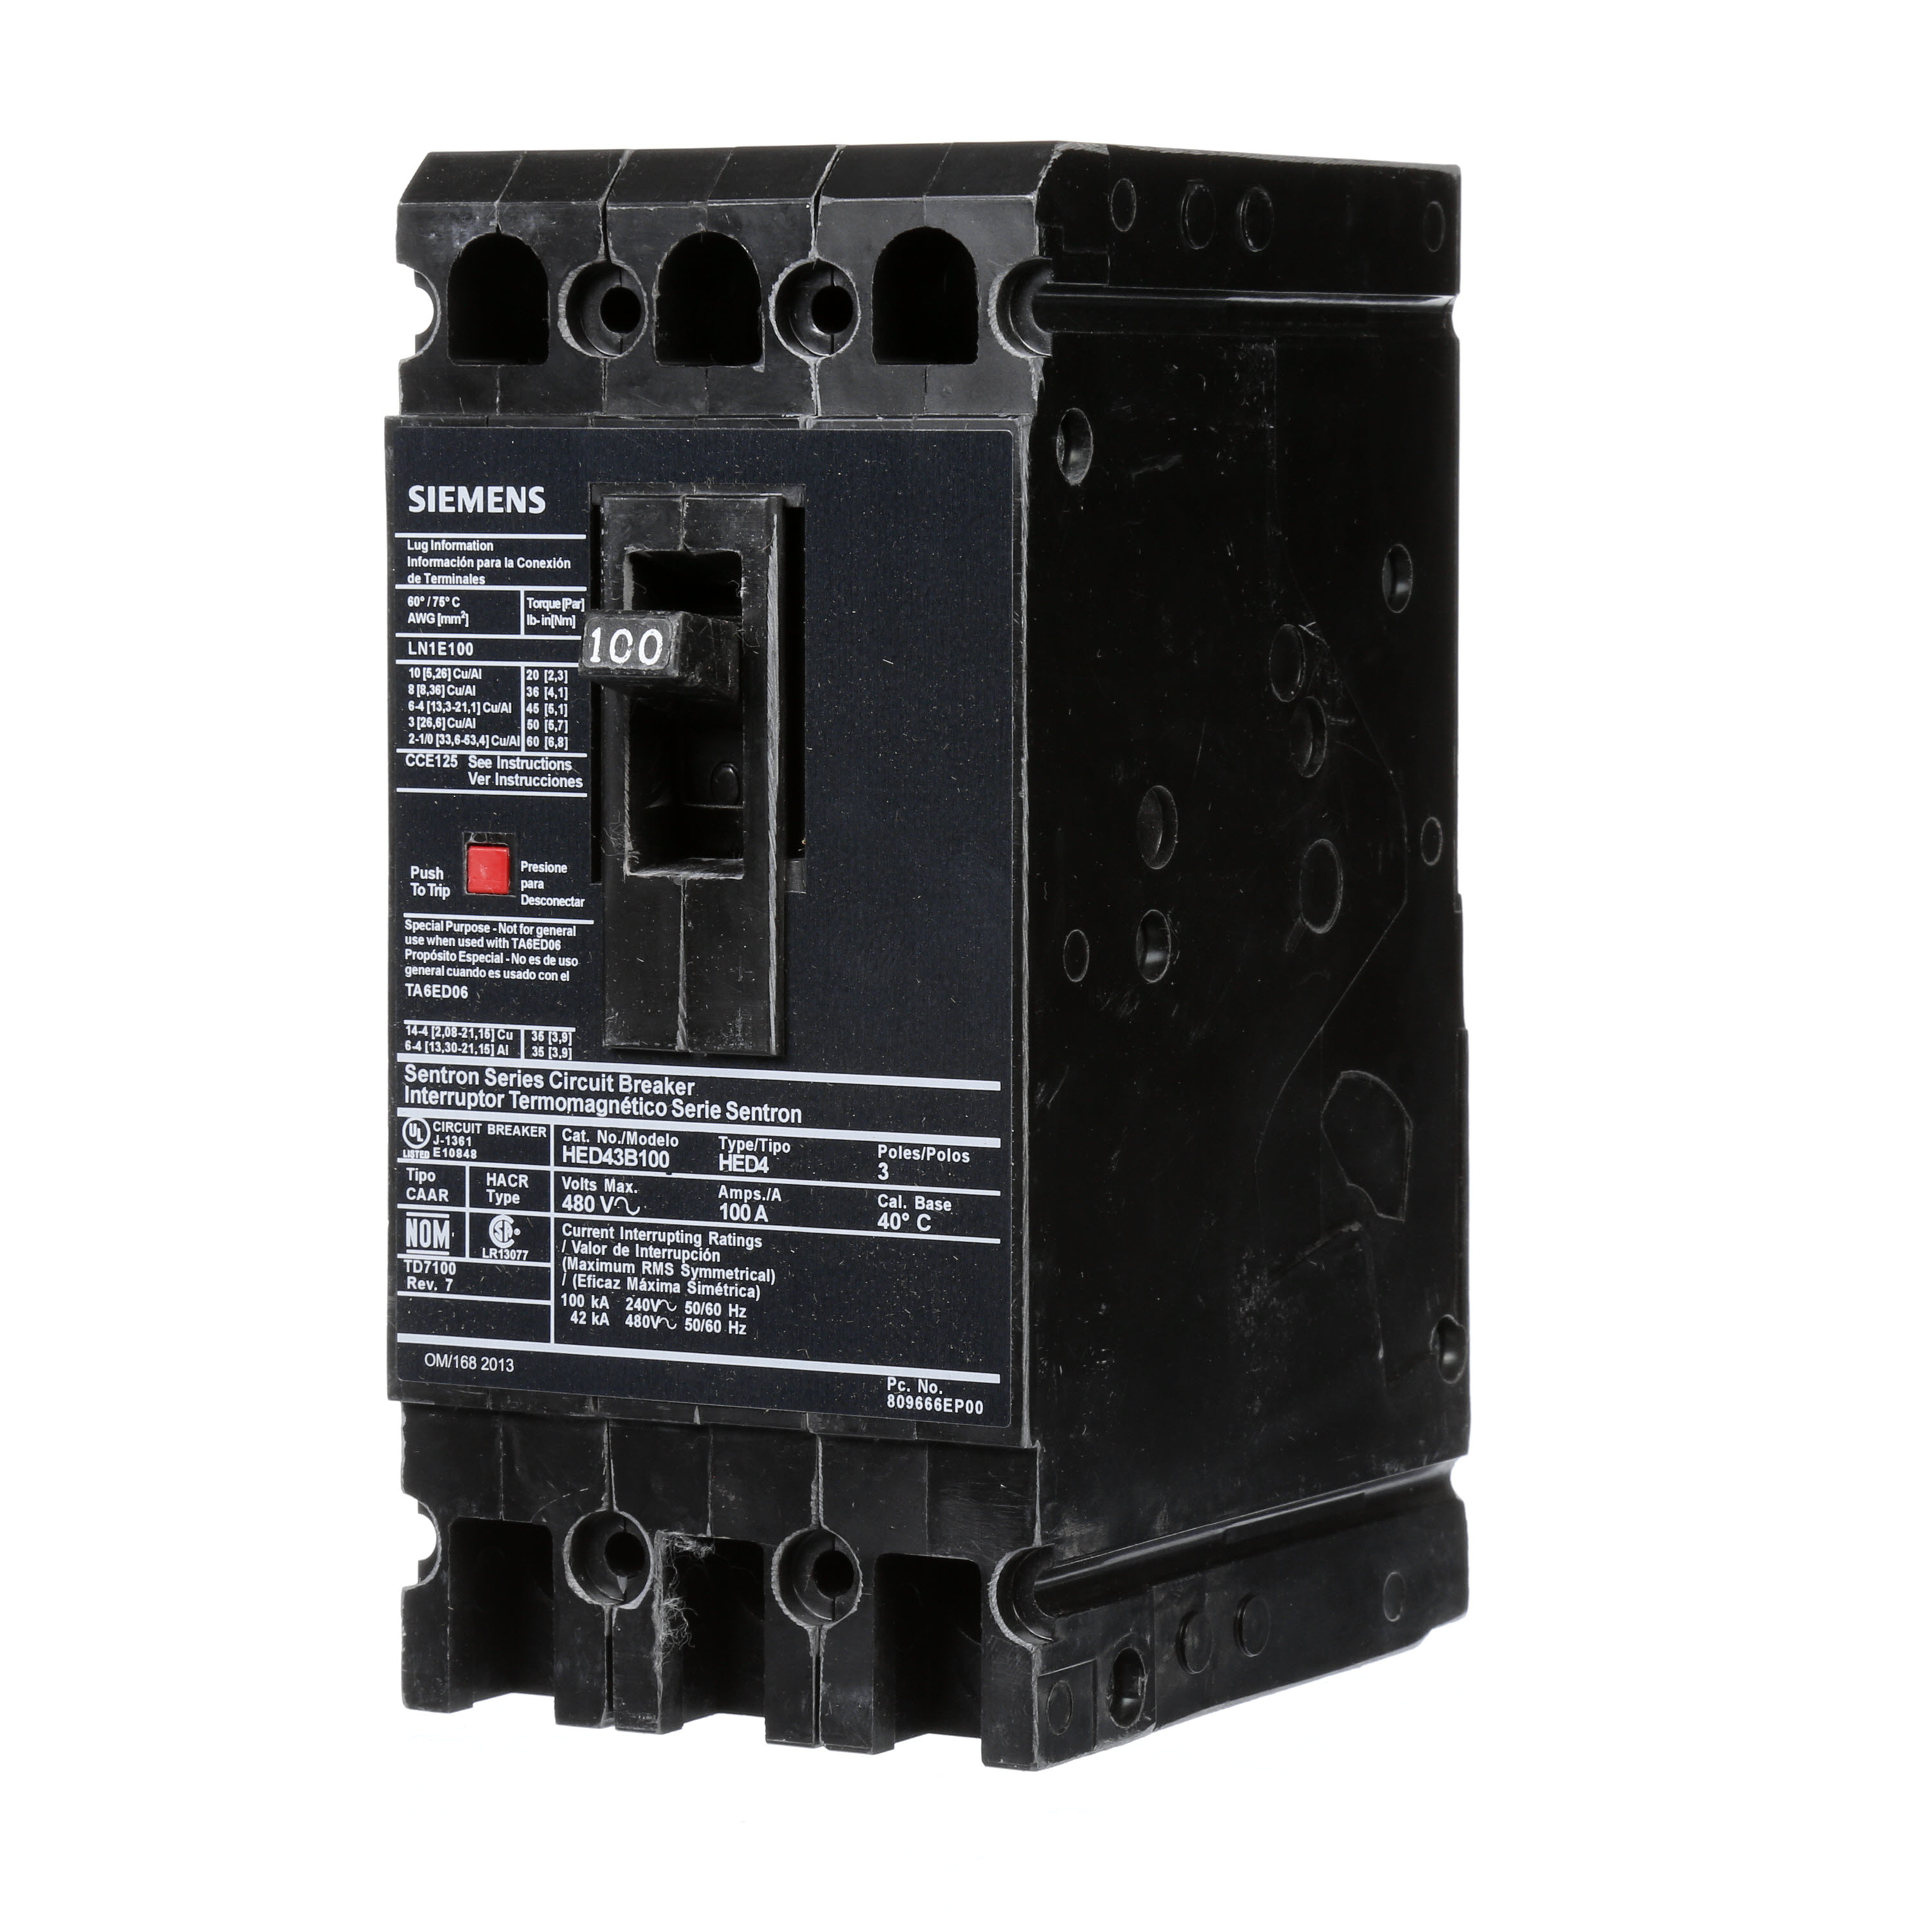 SIEMENS LOW VOLTAGE SENTRON MOLDED CASE CIRCUIT BREAKER WITH THERMAL - MAGNETICTRIP UNIT. STANDARD 40 DEG C BREAKER ED FRAME WITH HIGH BREAKING CAPACITY. 100A3-POLE (42KAIC AT 480V). NON-INTERCHANGEABLE TRIP UNIT. SPECIAL FEATURES LOAD LUGS ONLY (LN1E100) WIRE RANGE 10 - 1/0AWG (CU/AL). DIMENSIONS (W x H x D) IN 3.00 x 6.4 x 3.92.